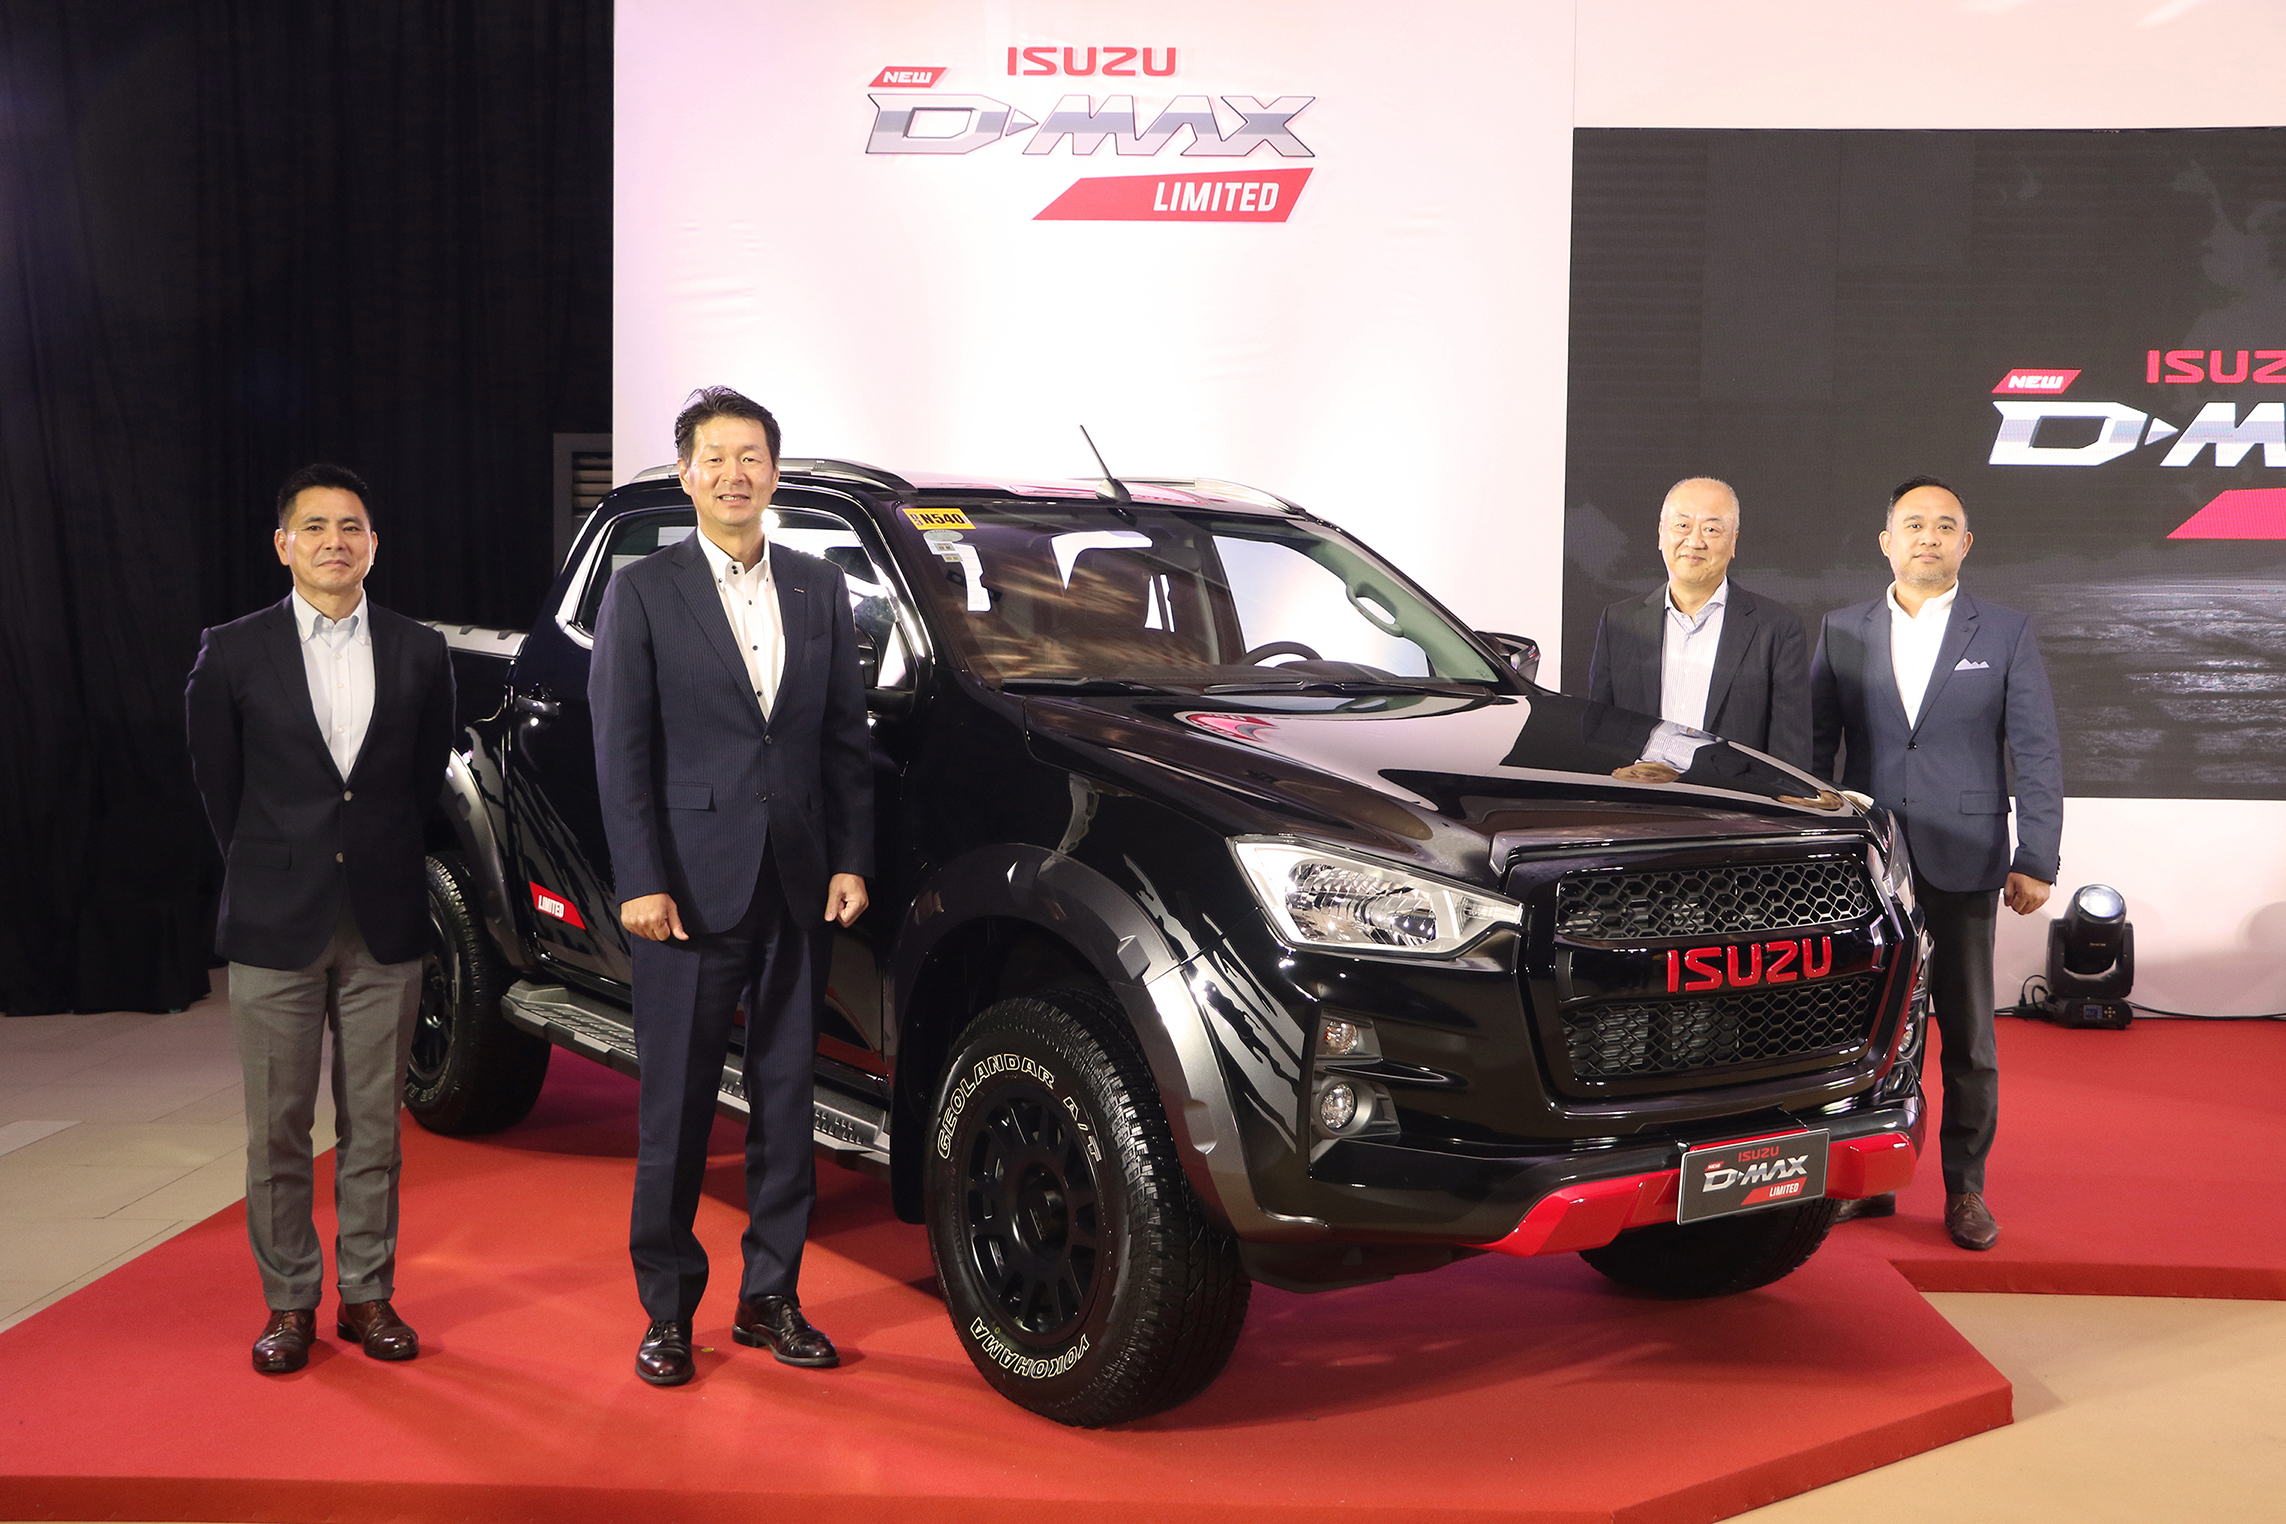 New Isuzu D-MAX Limited set to 'Unleash Your Drive' image